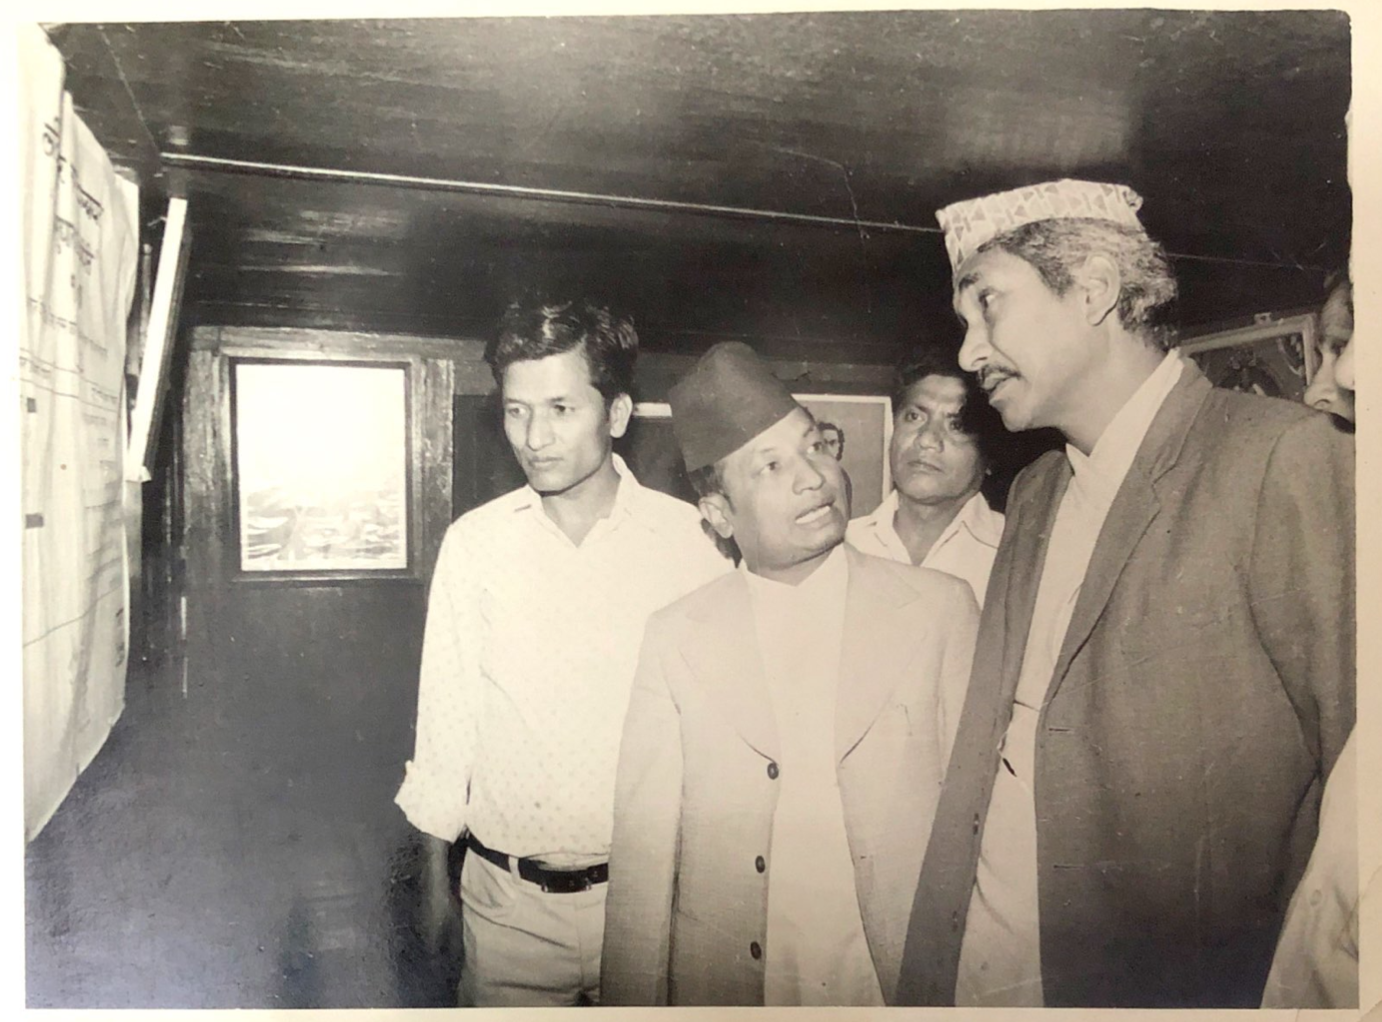 Yagya Man giving a site tour to the then Minister while he was working in the Land Administration Department